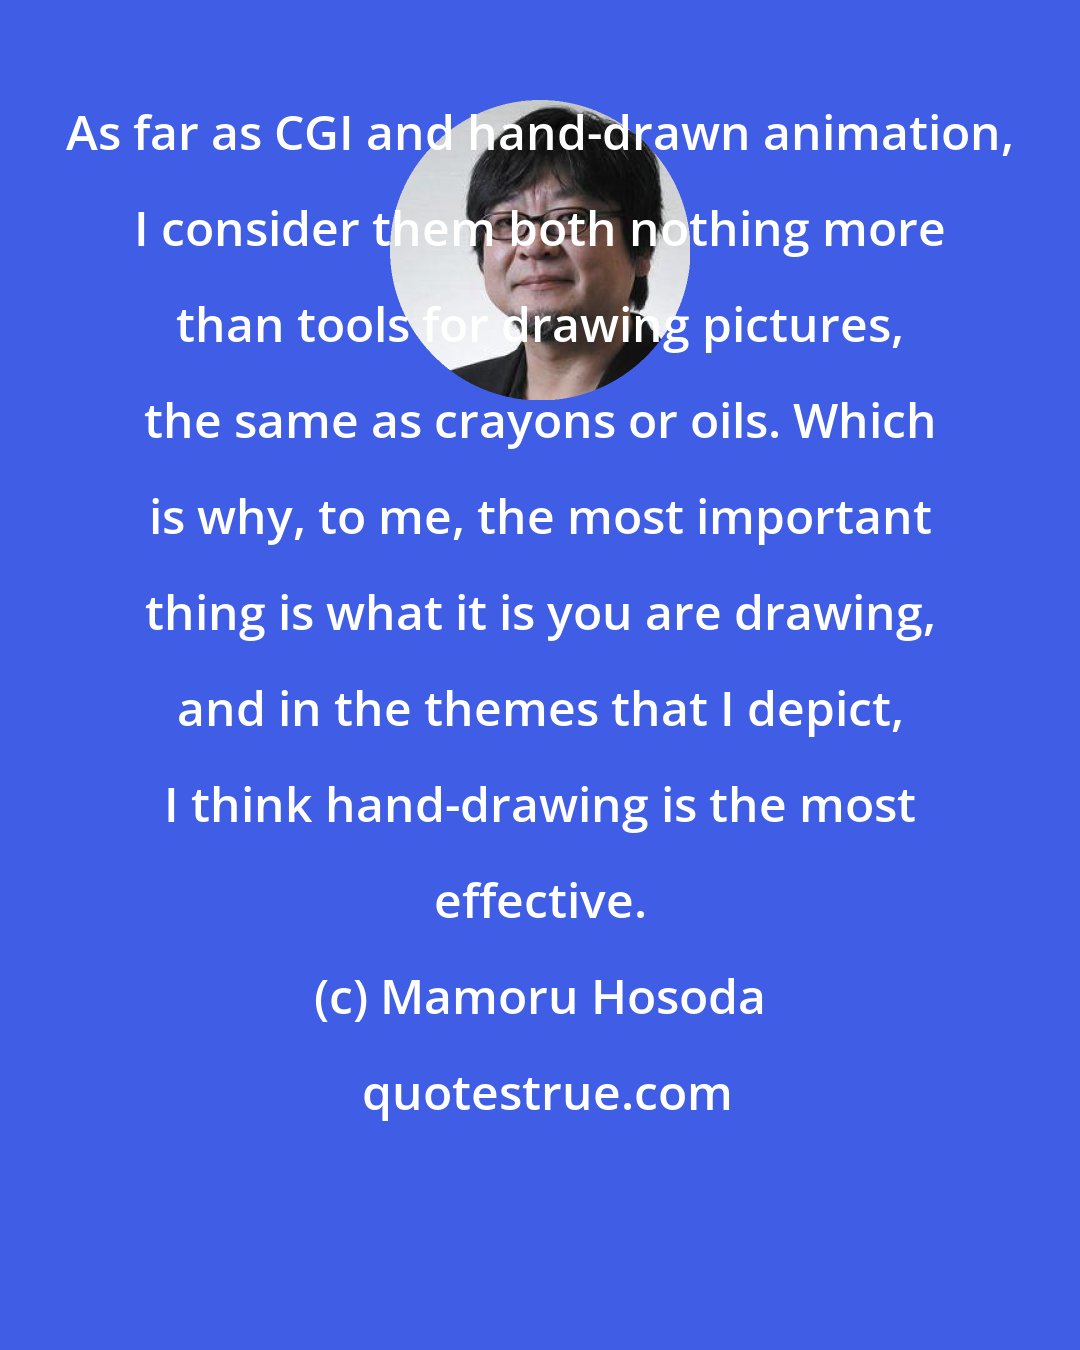 Mamoru Hosoda: As far as CGI and hand-drawn animation, I consider them both nothing more than tools for drawing pictures, the same as crayons or oils. Which is why, to me, the most important thing is what it is you are drawing, and in the themes that I depict, I think hand-drawing is the most effective.